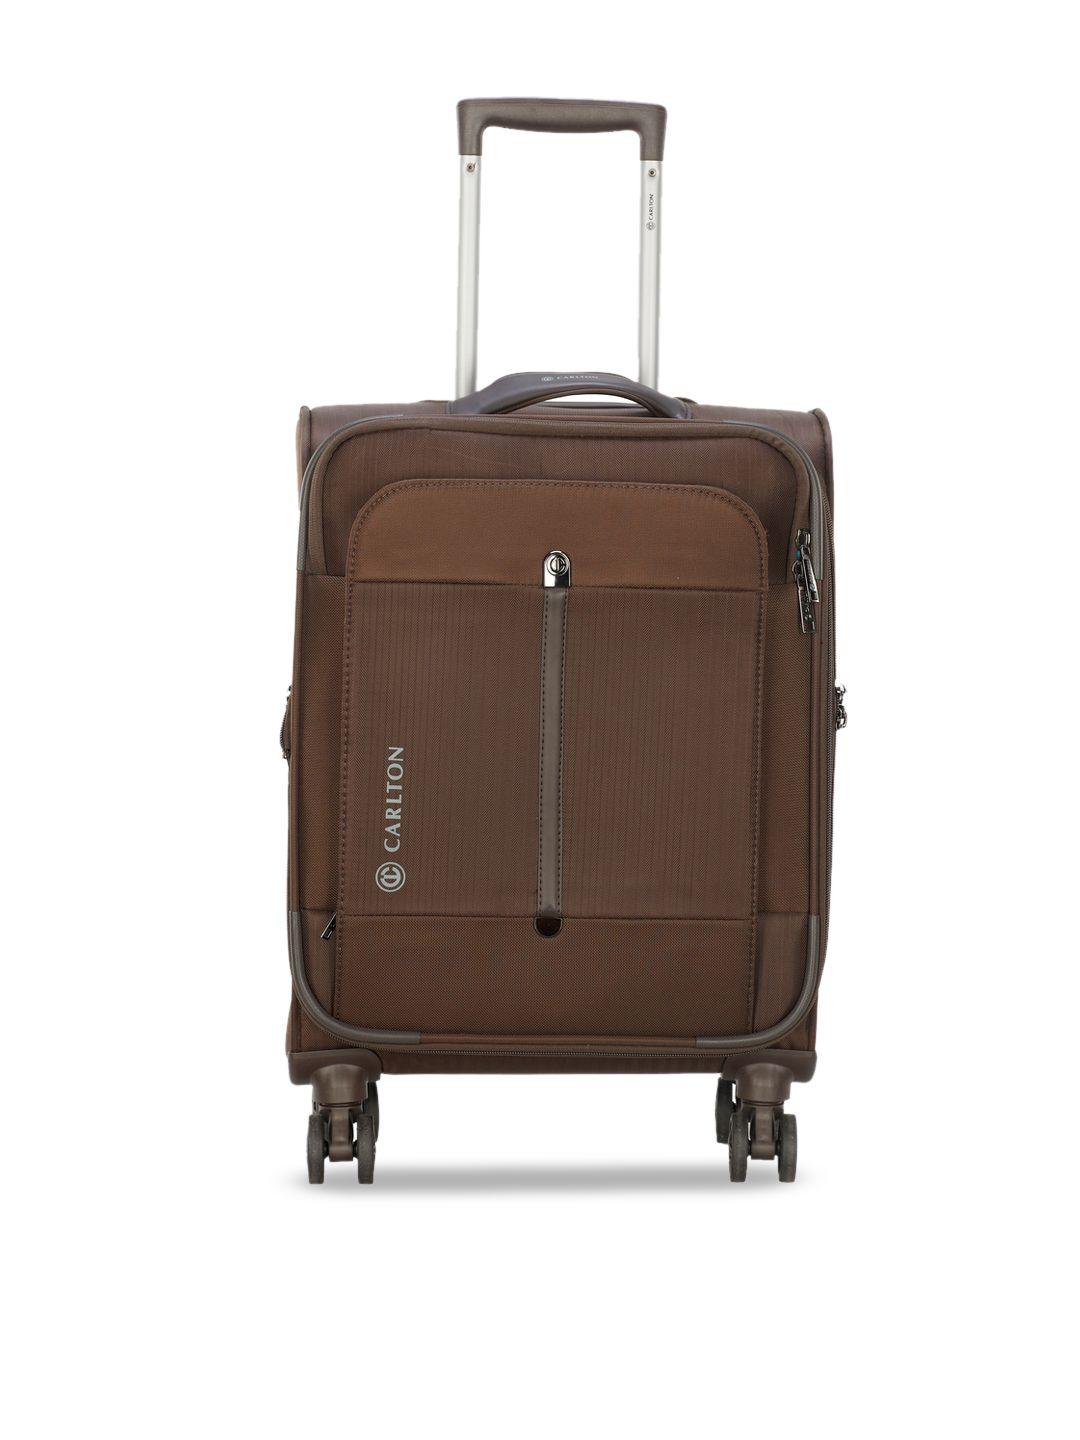 carlton textured cabin trolley suitcase